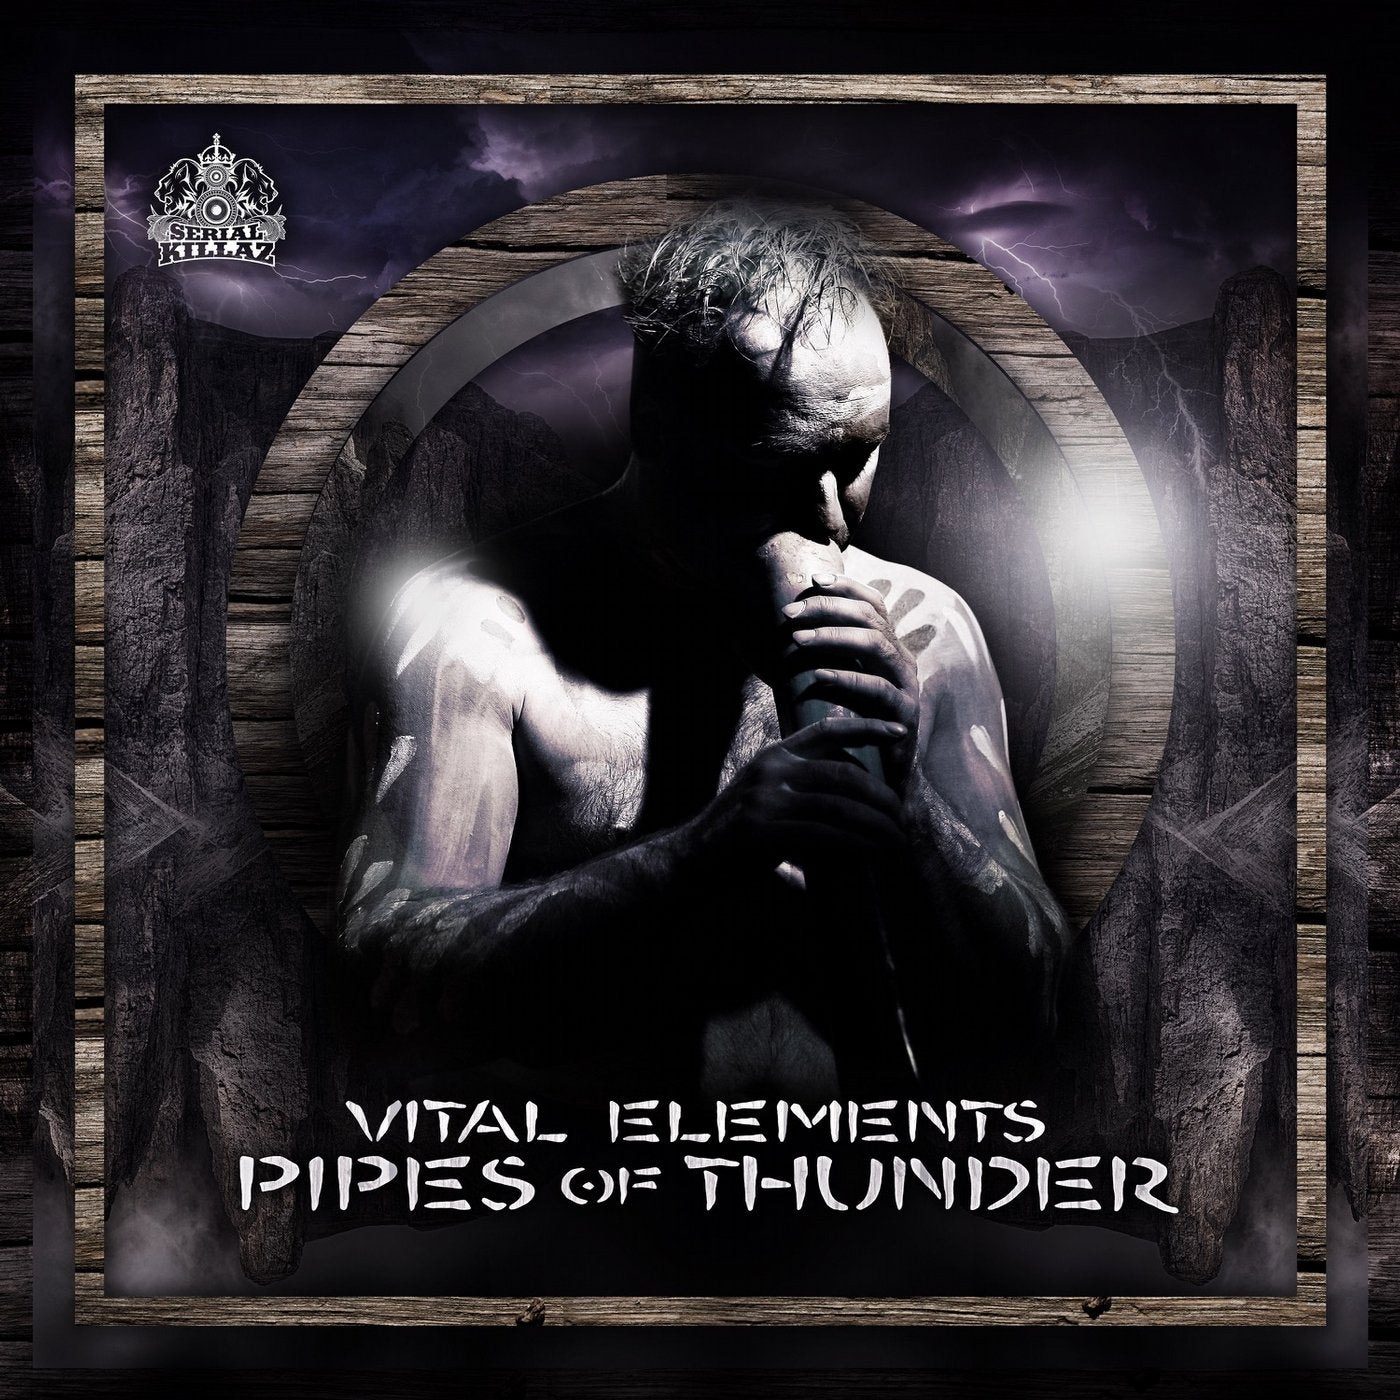 Pipes of Thunder